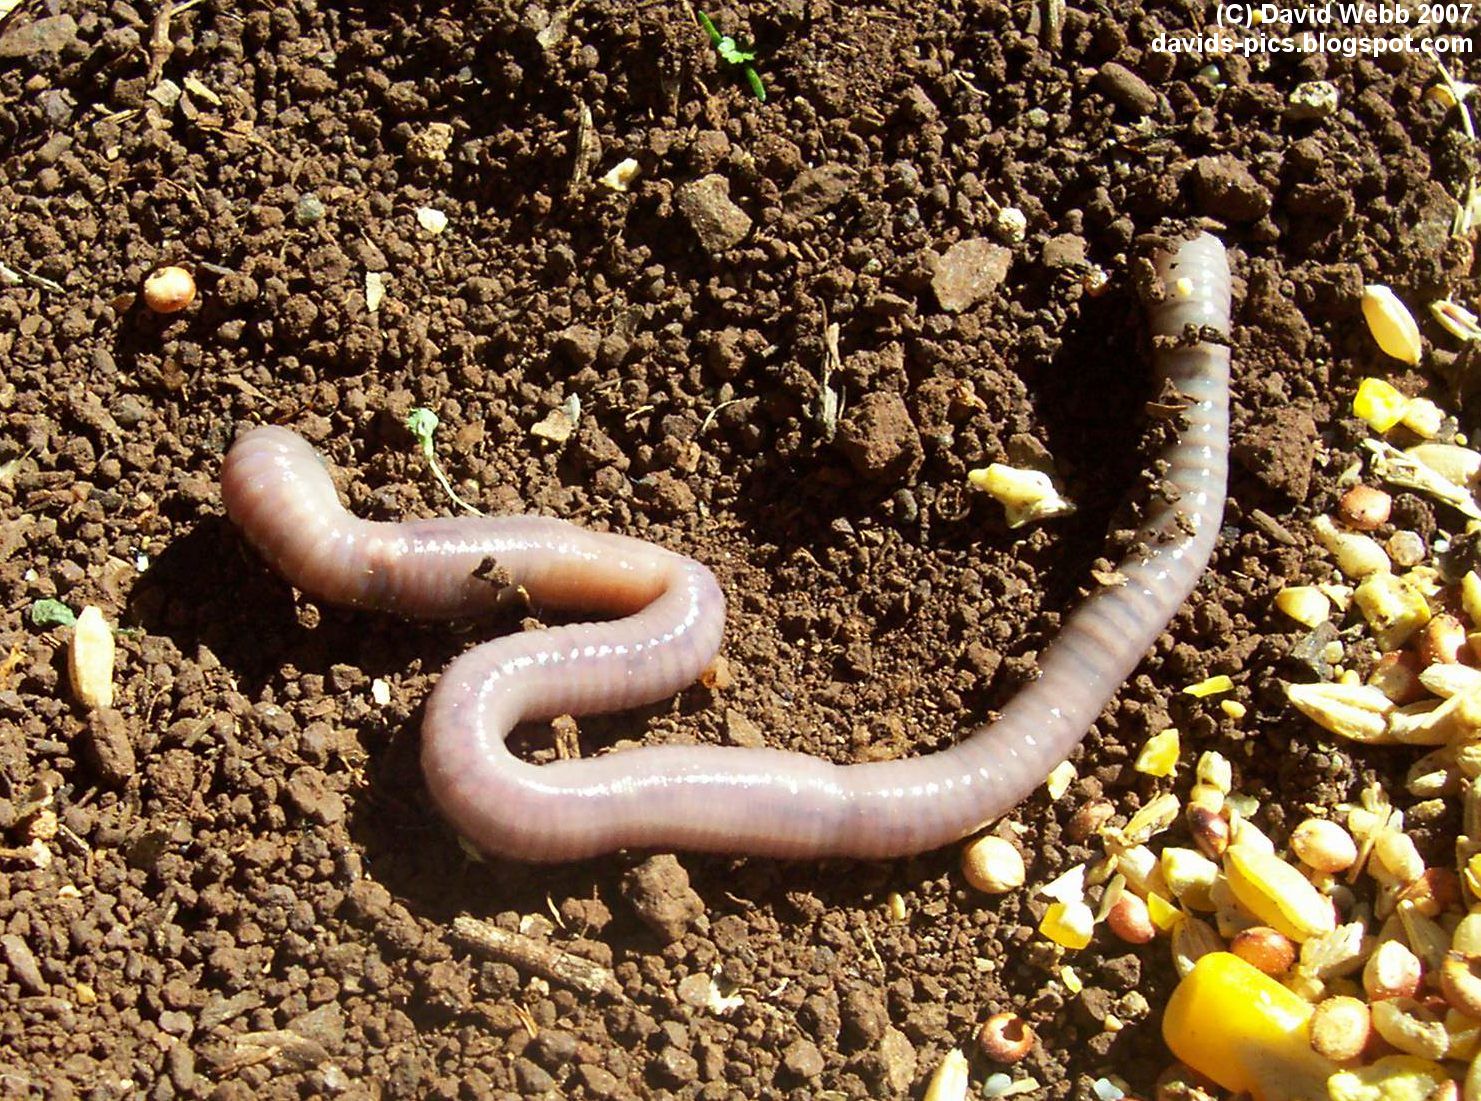 the earth worm - the creature from below - an earthworm on dirt with various grains: corn, sorghum, etc.